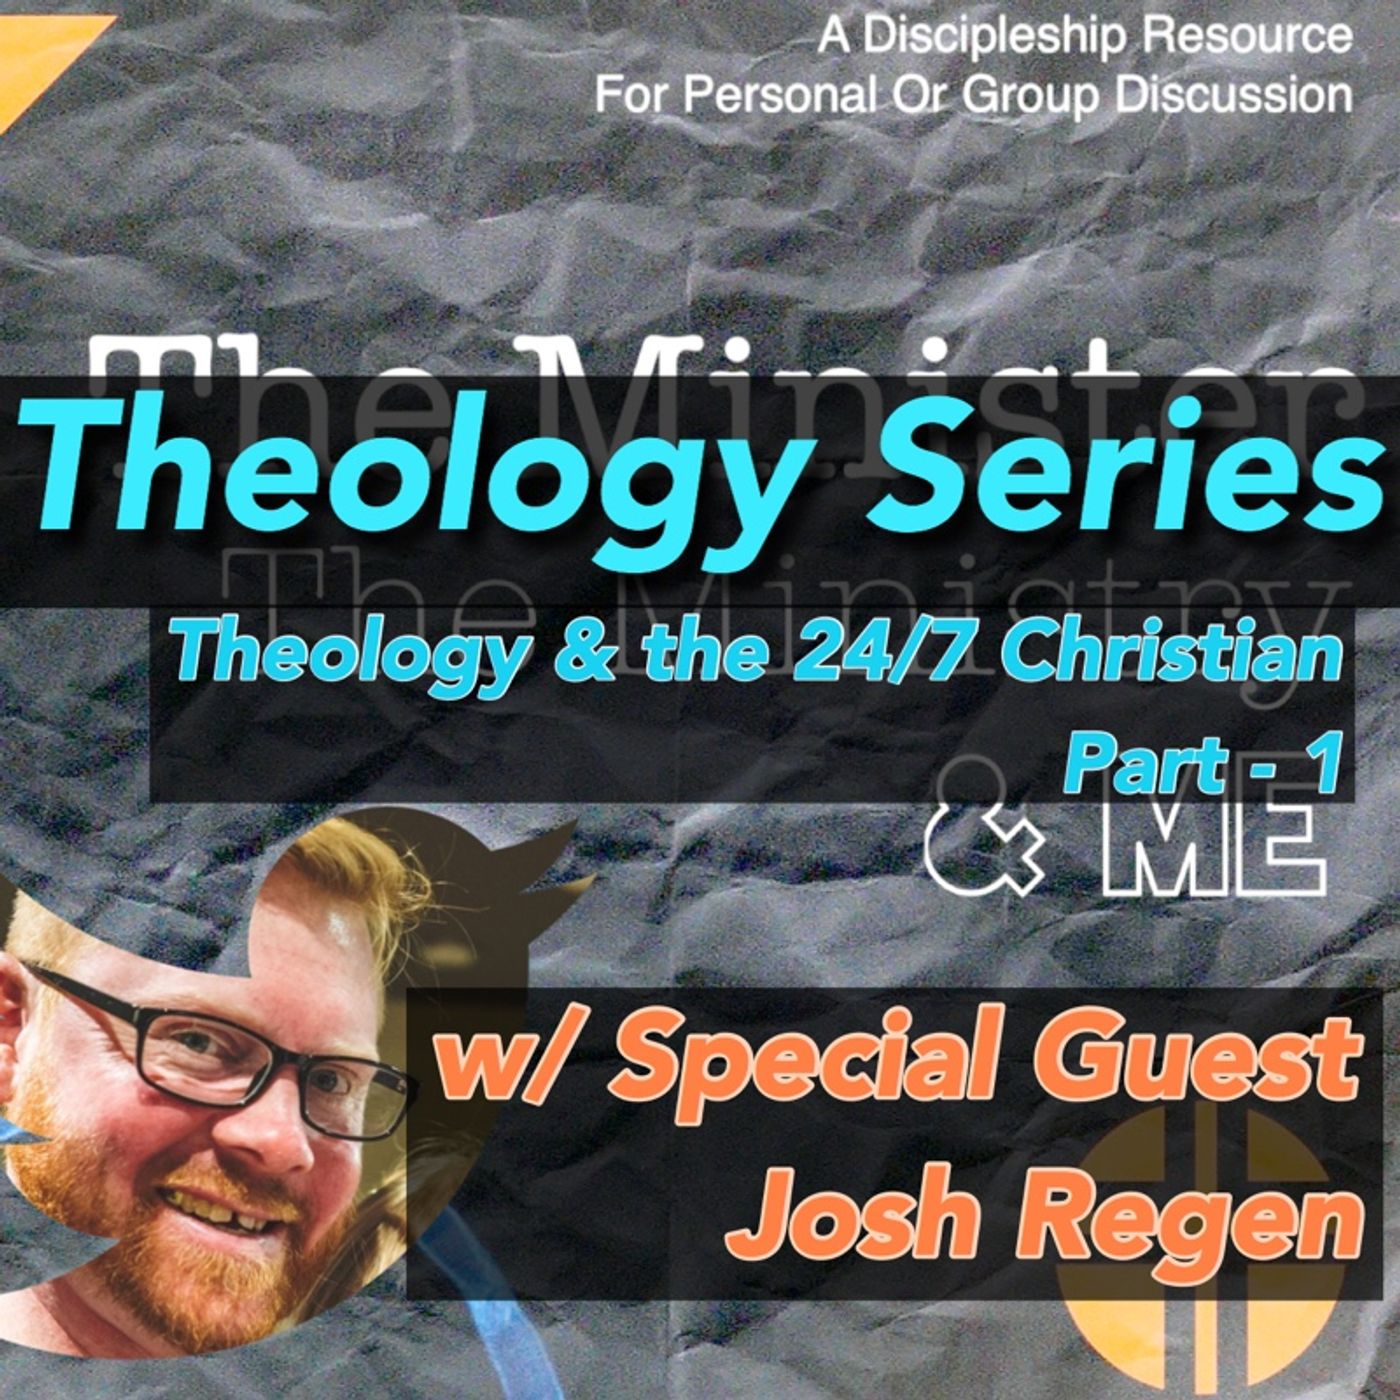 Theology and The 24/7 Christian w/ Guest Josh Ragan - Part 1